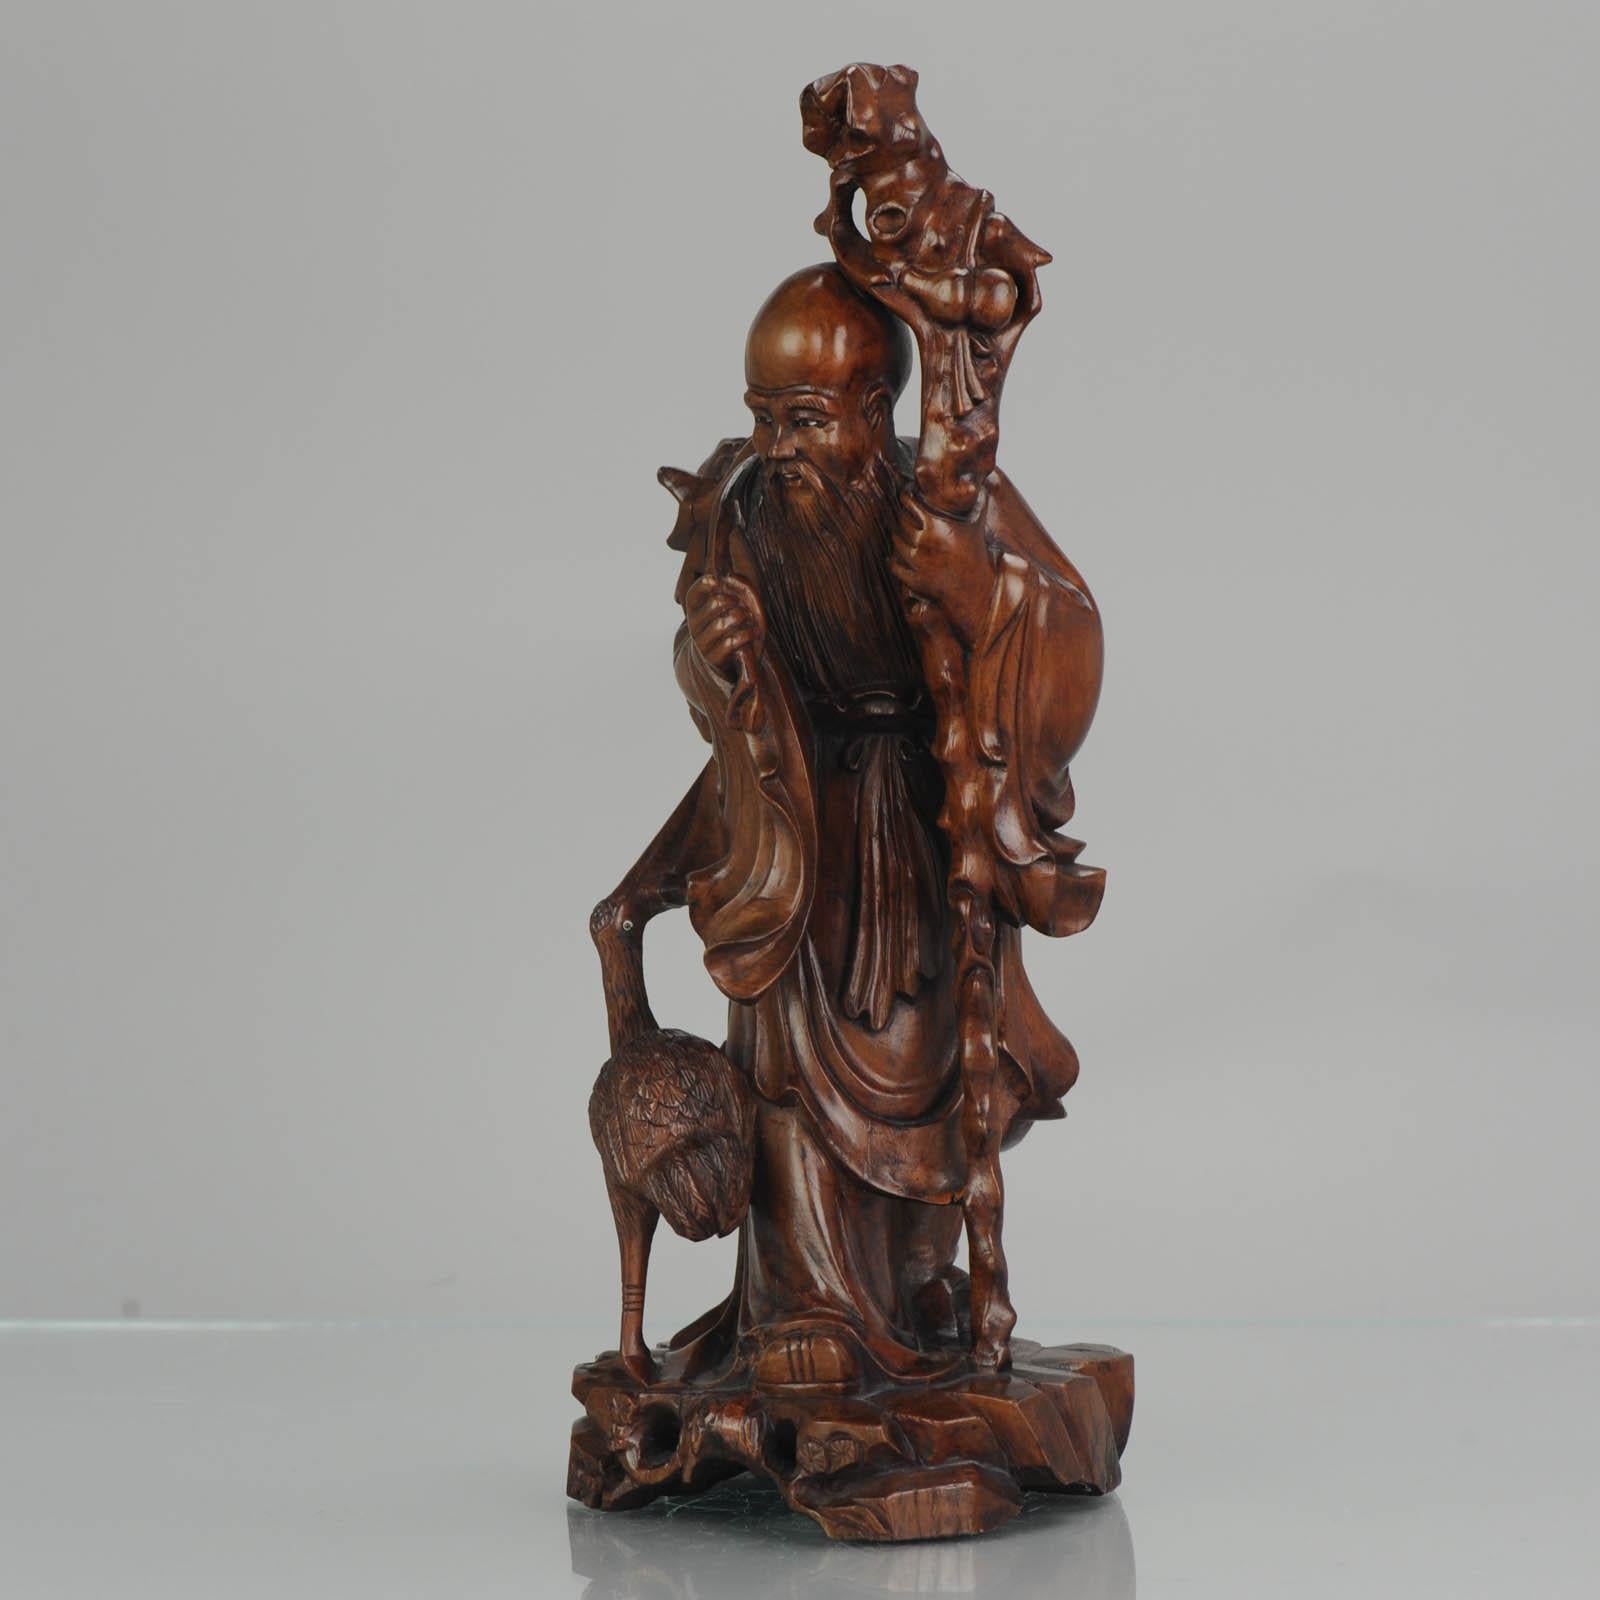 China, finely carved wooden statue. Carved with Shou Lau, Chinese longevity god and a crane (sacred bird), circa 1900.

Condition
Overall condition just some tiny age signs like small frits/cracks, barely visible at distance. Size: 315mm high